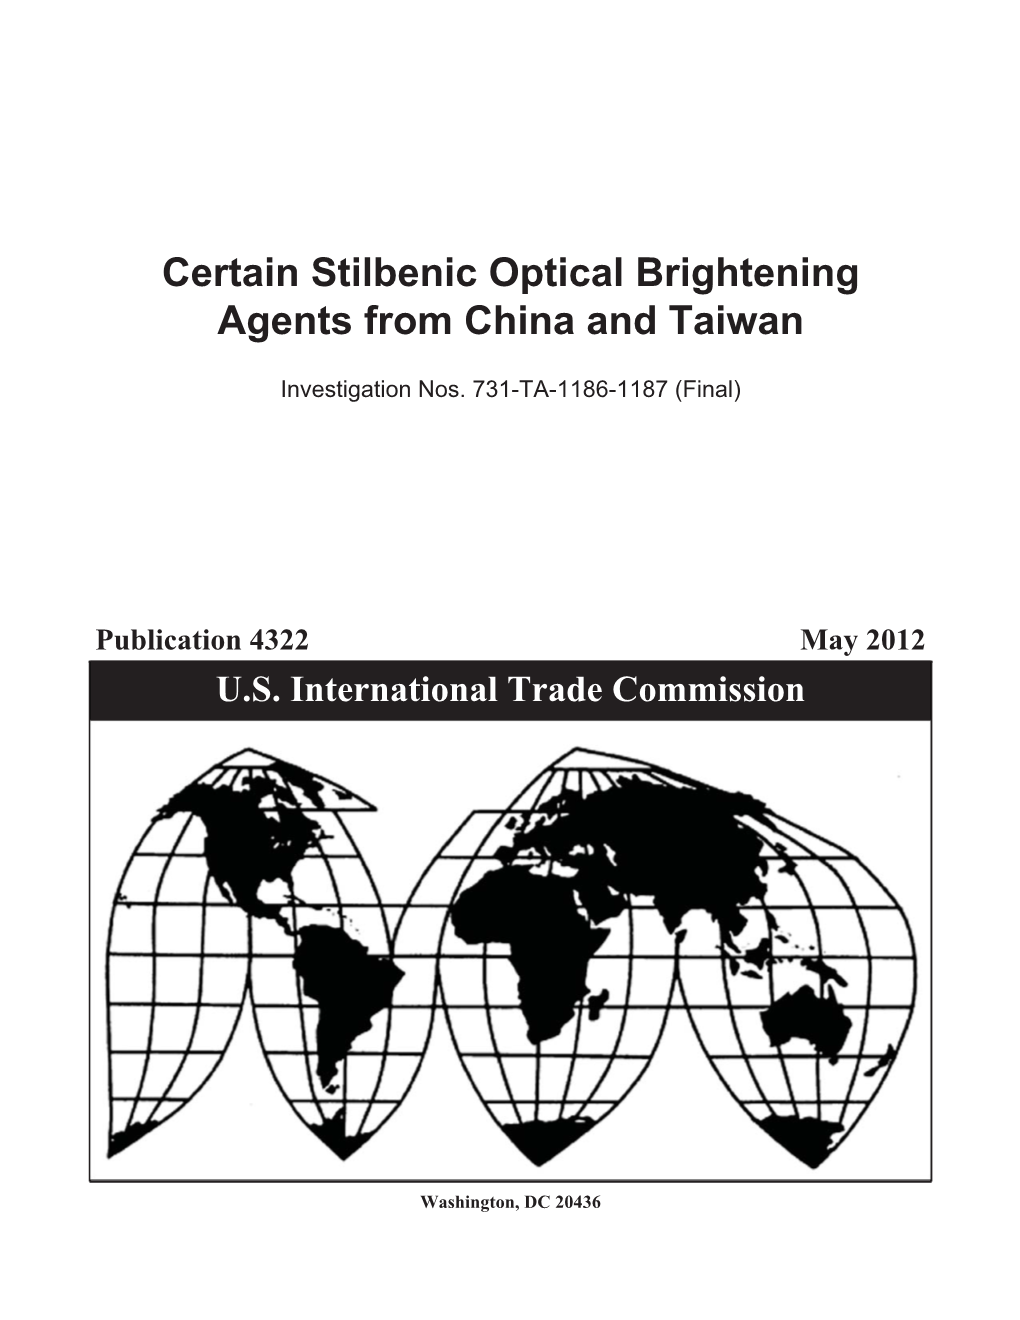 Certain Stilbenic Optical Brightening Agents from China and Taiwan